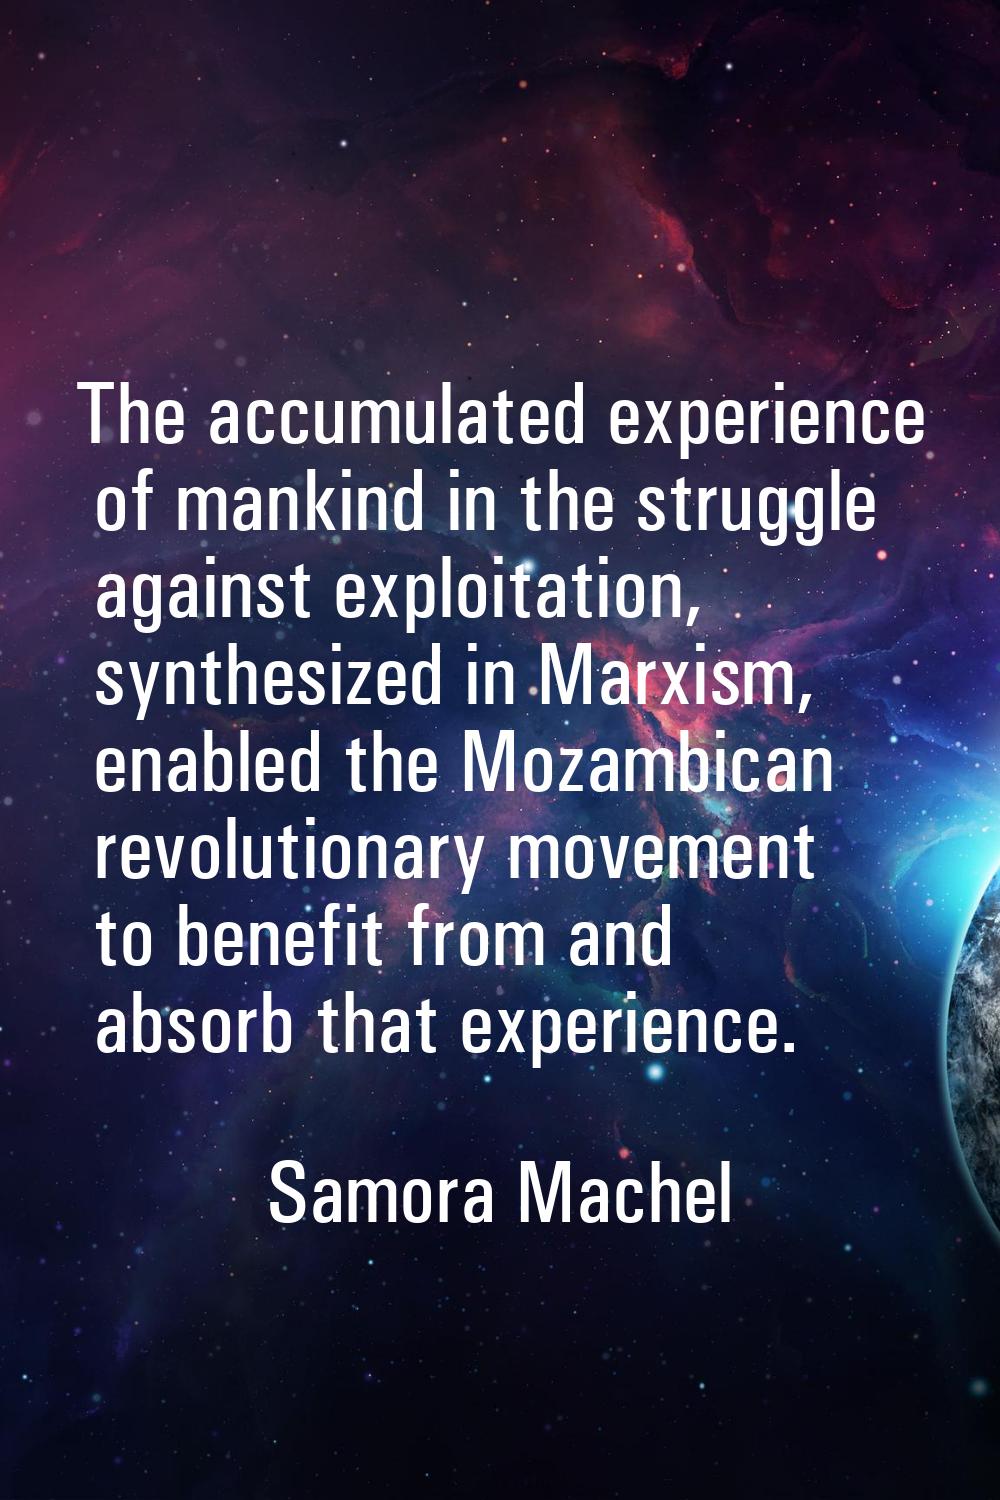 The accumulated experience of mankind in the struggle against exploitation, synthesized in Marxism,